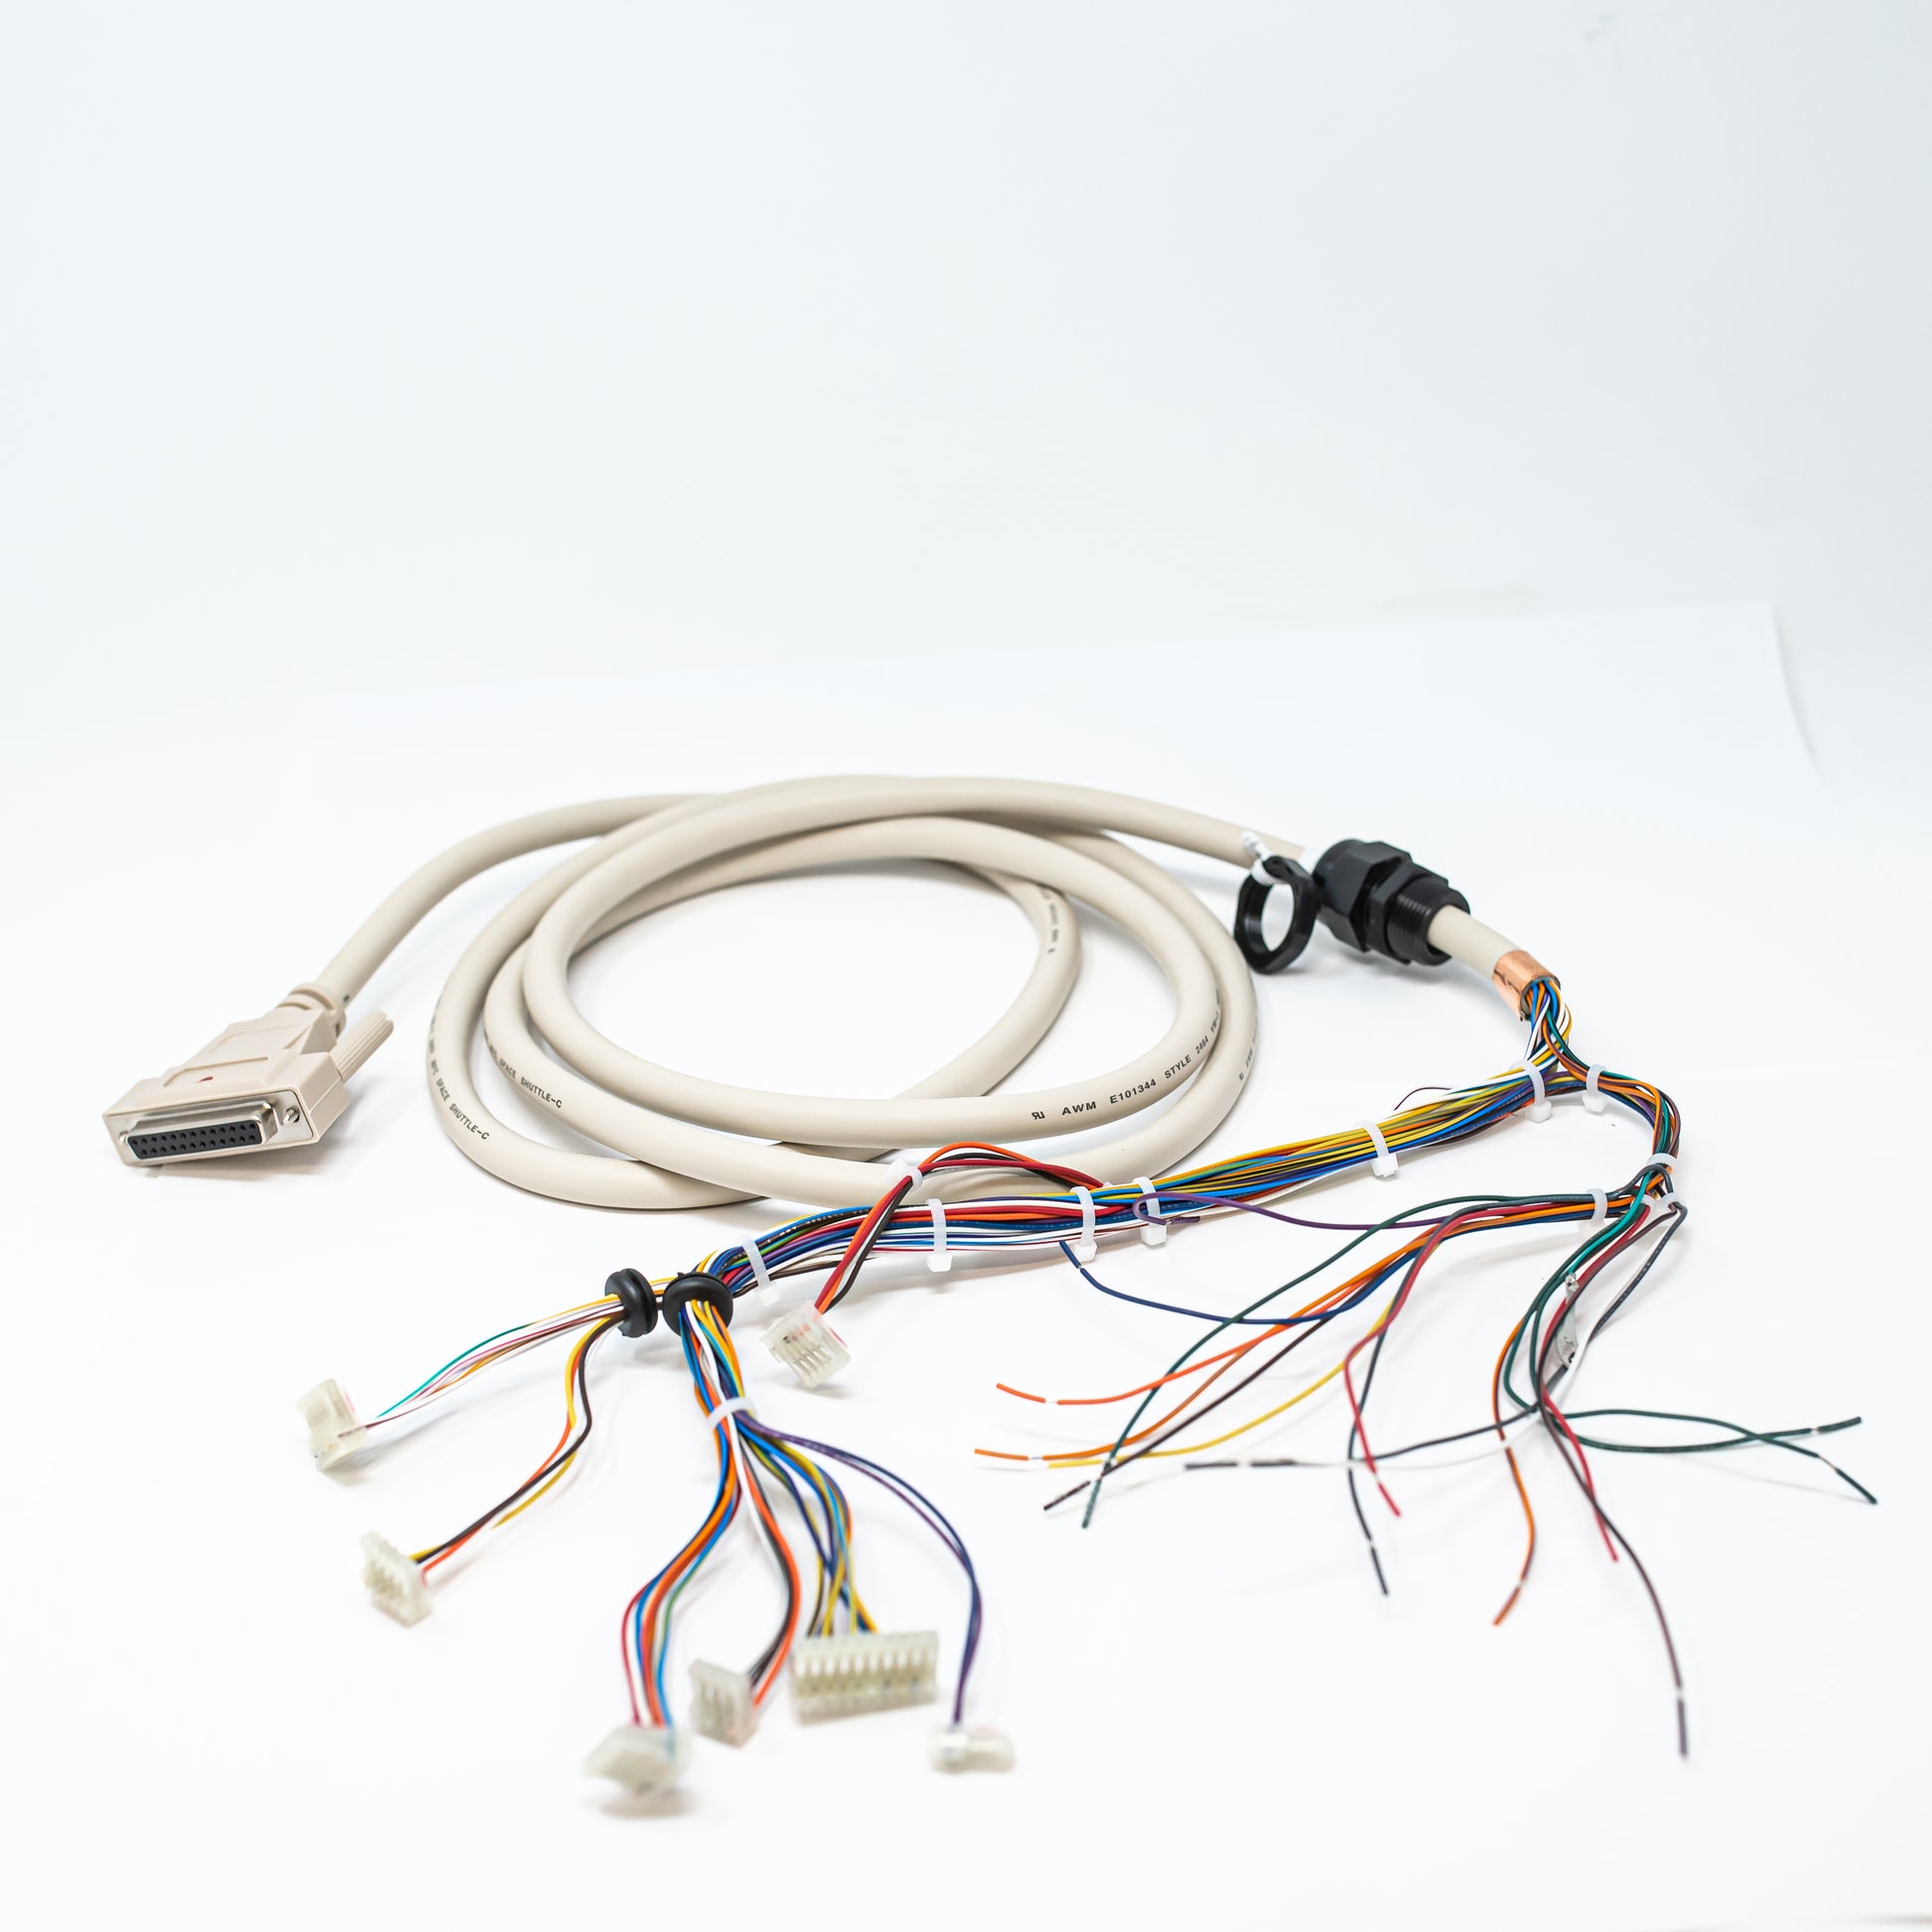 Main harness for pump with integral motor encoder